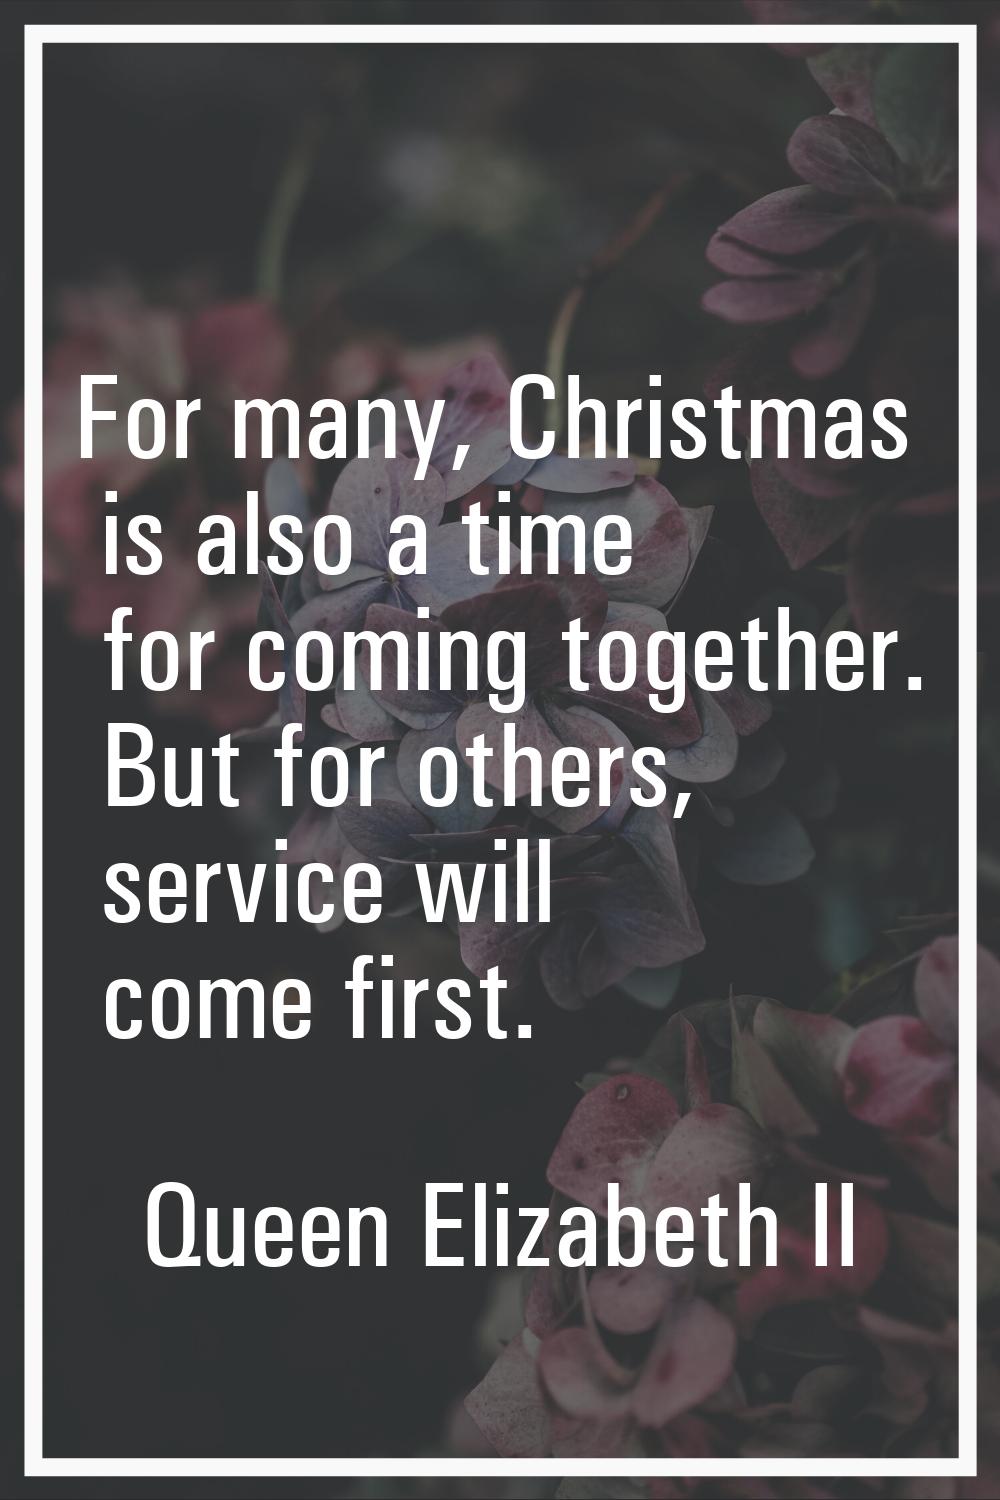 For many, Christmas is also a time for coming together. But for others, service will come first.